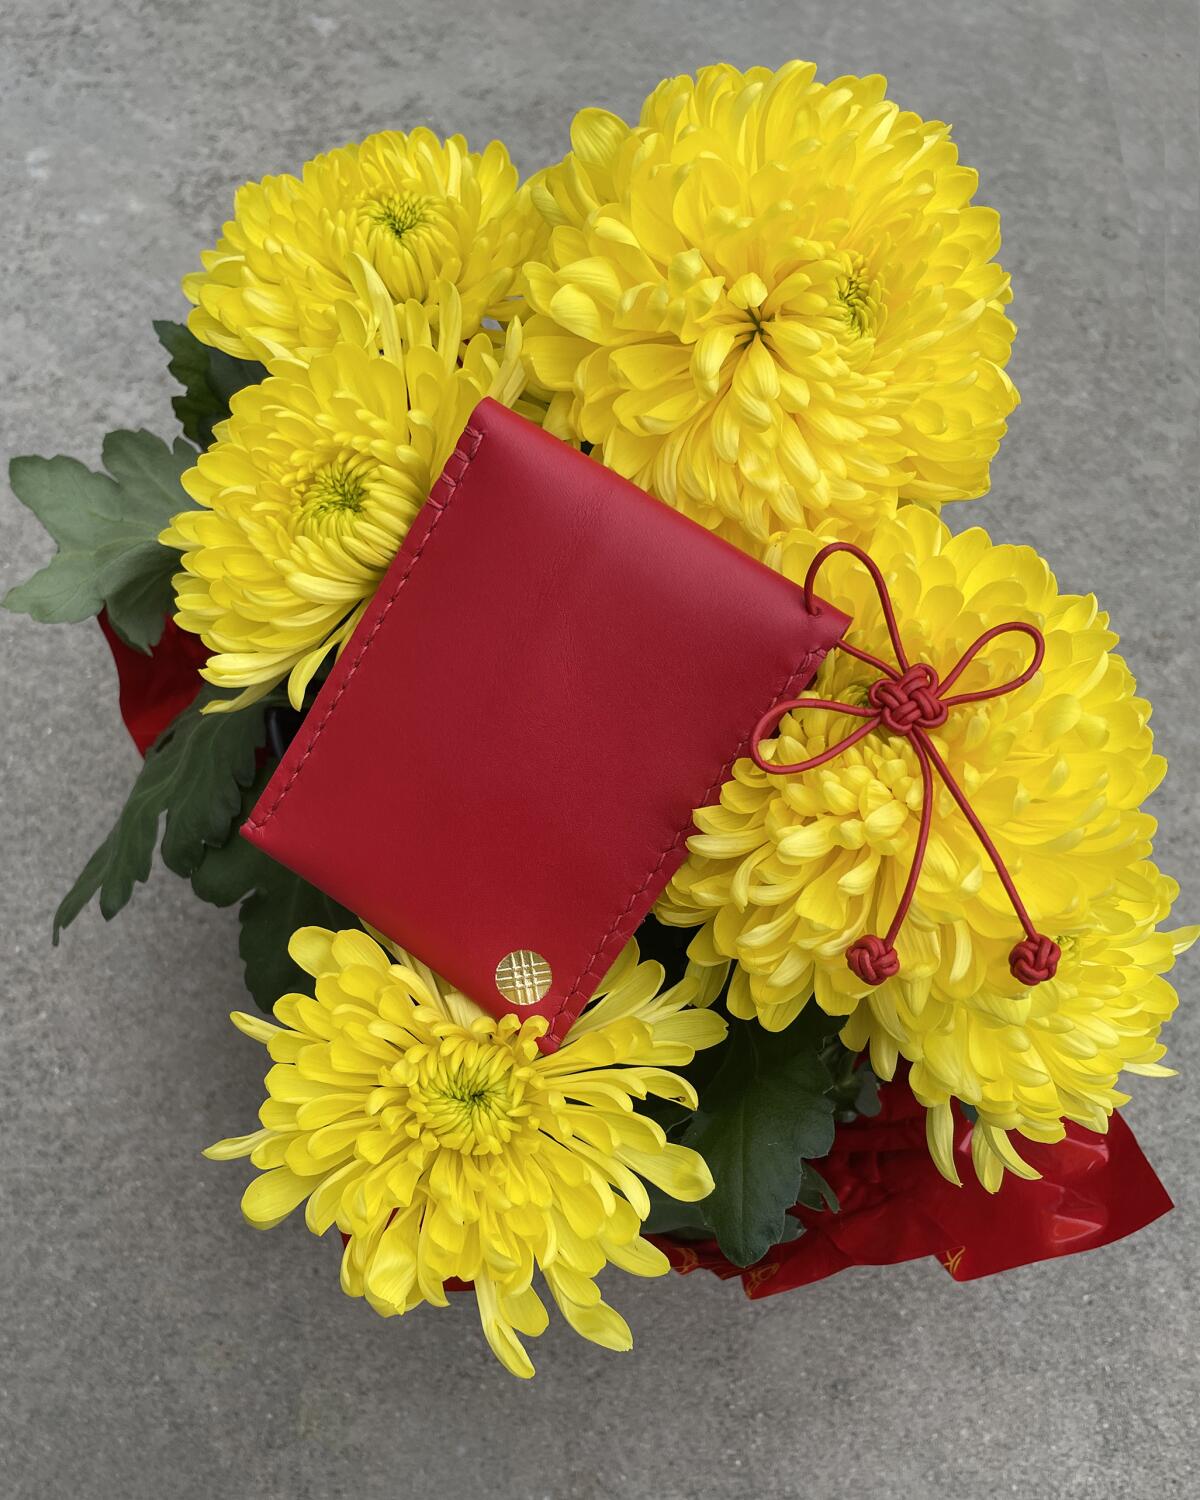 A red leather bag sitting on yellow chrysanthemums